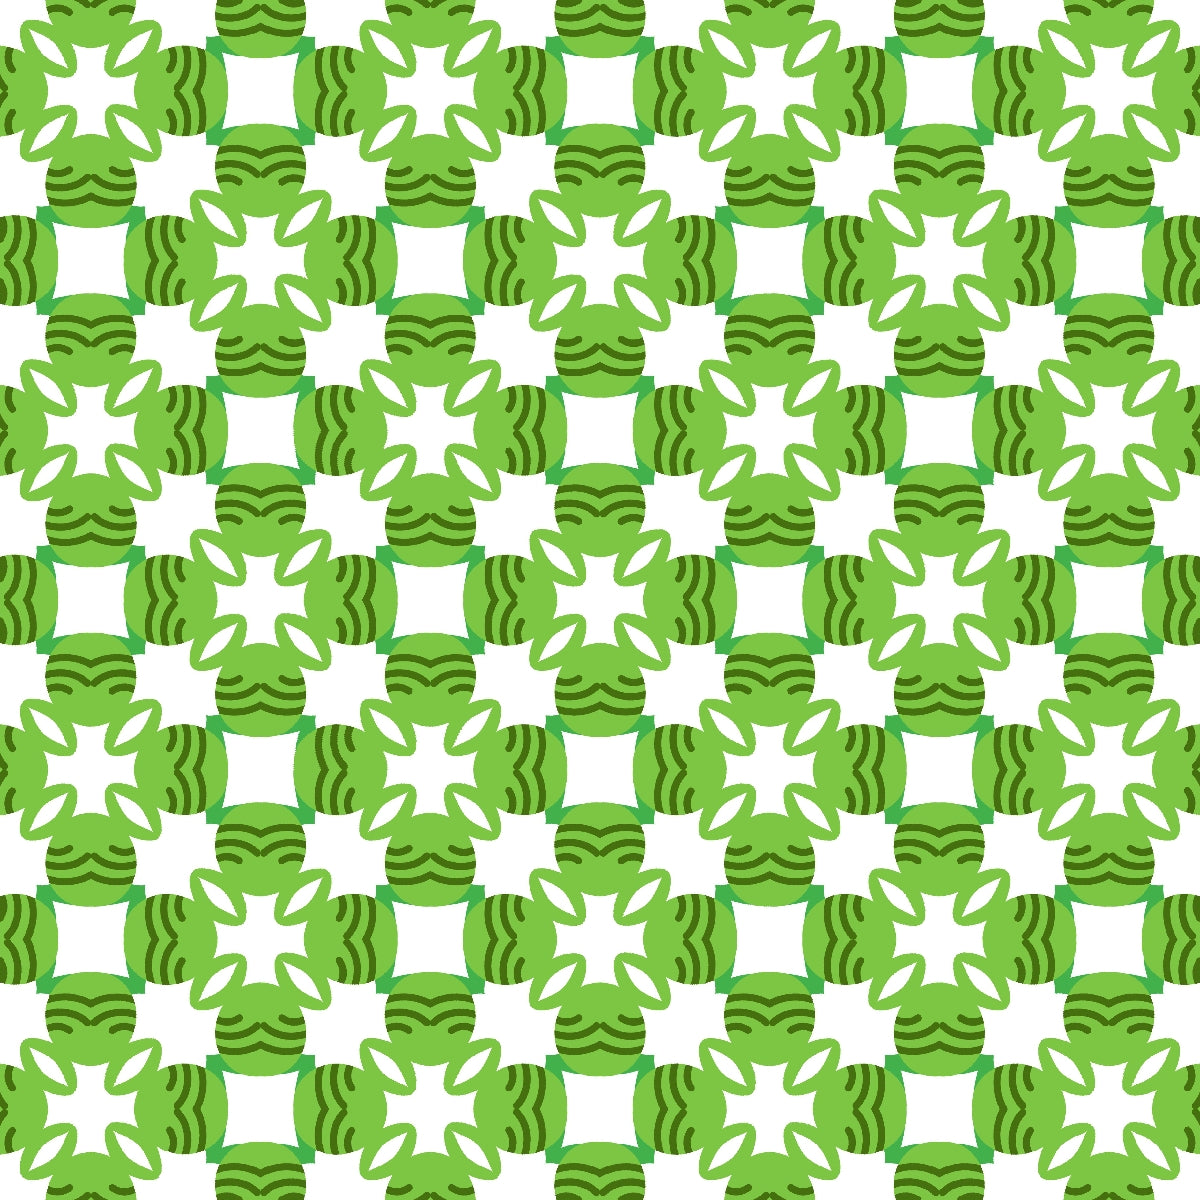 Green Abstract Seamless Pattern 36.0 - Printable Scrapbook Paper 